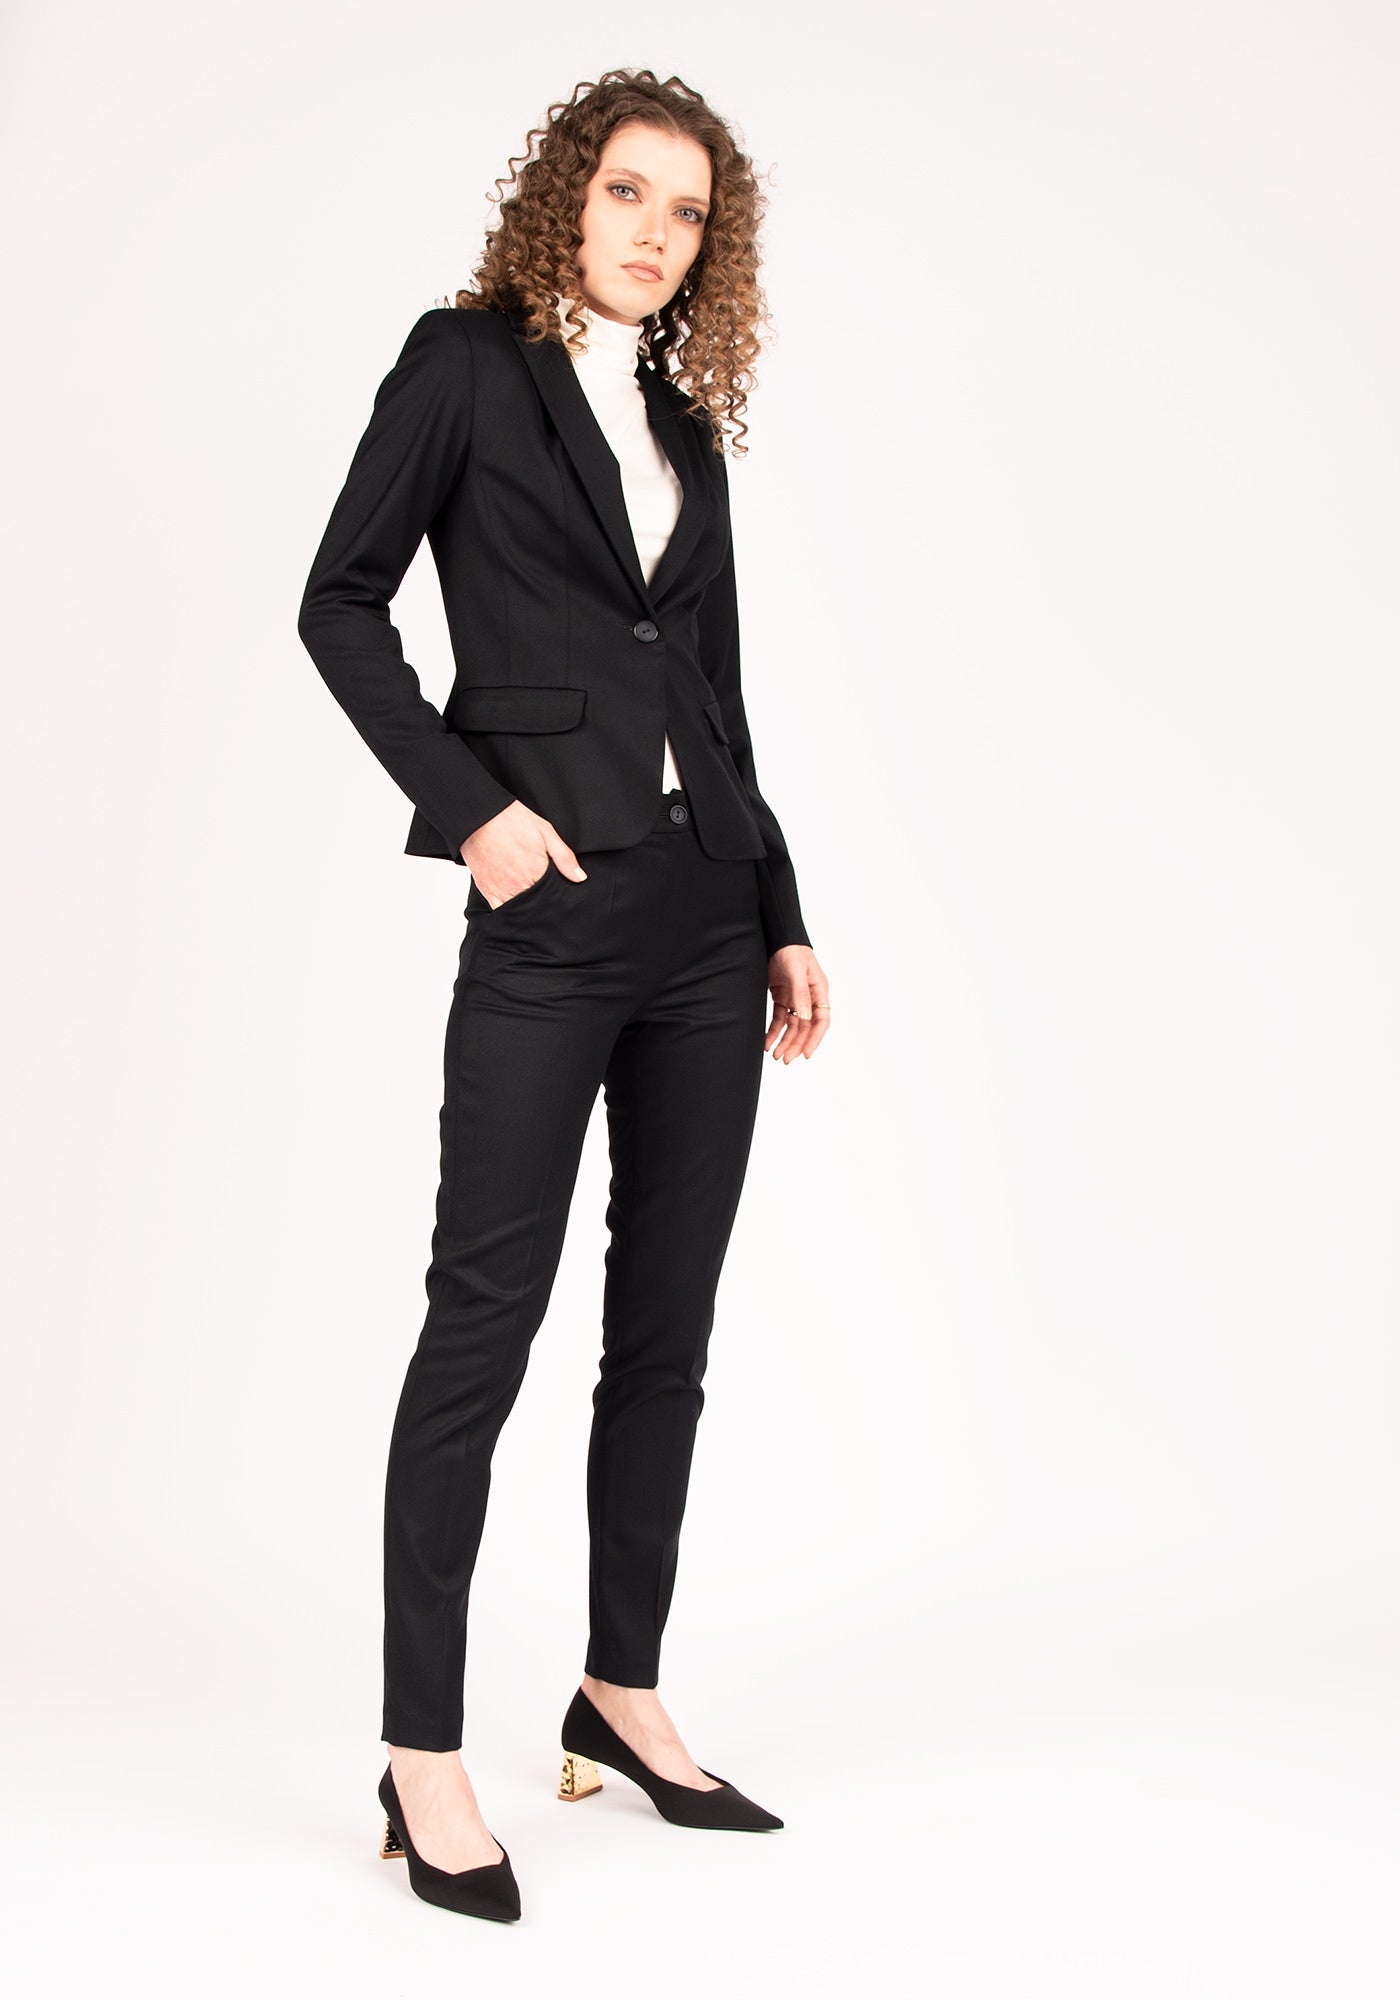 Women's Tailored Office Pant suit in Navy